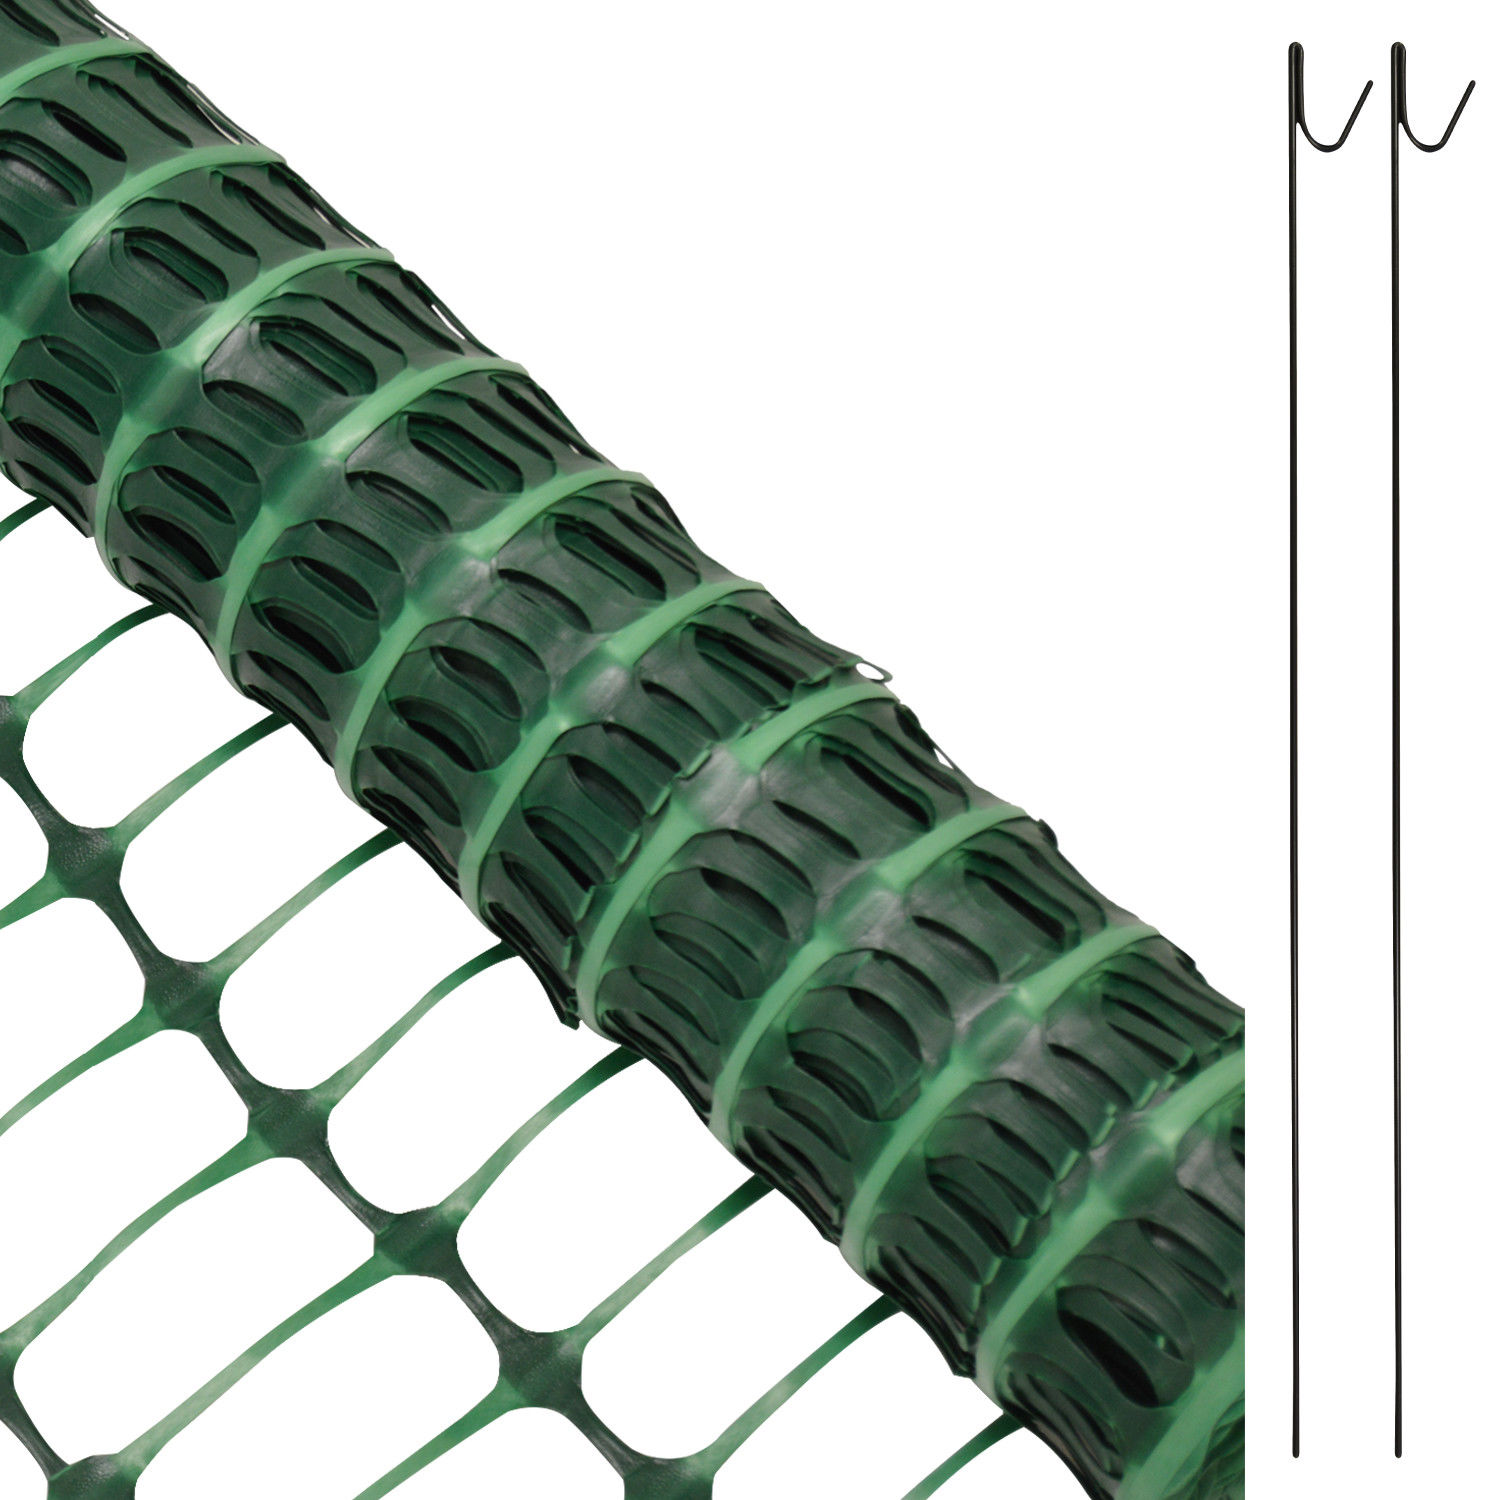 Woodside Plastic Barrier Safety Mesh Fence Netting Net With 10 Metal Pins eBay